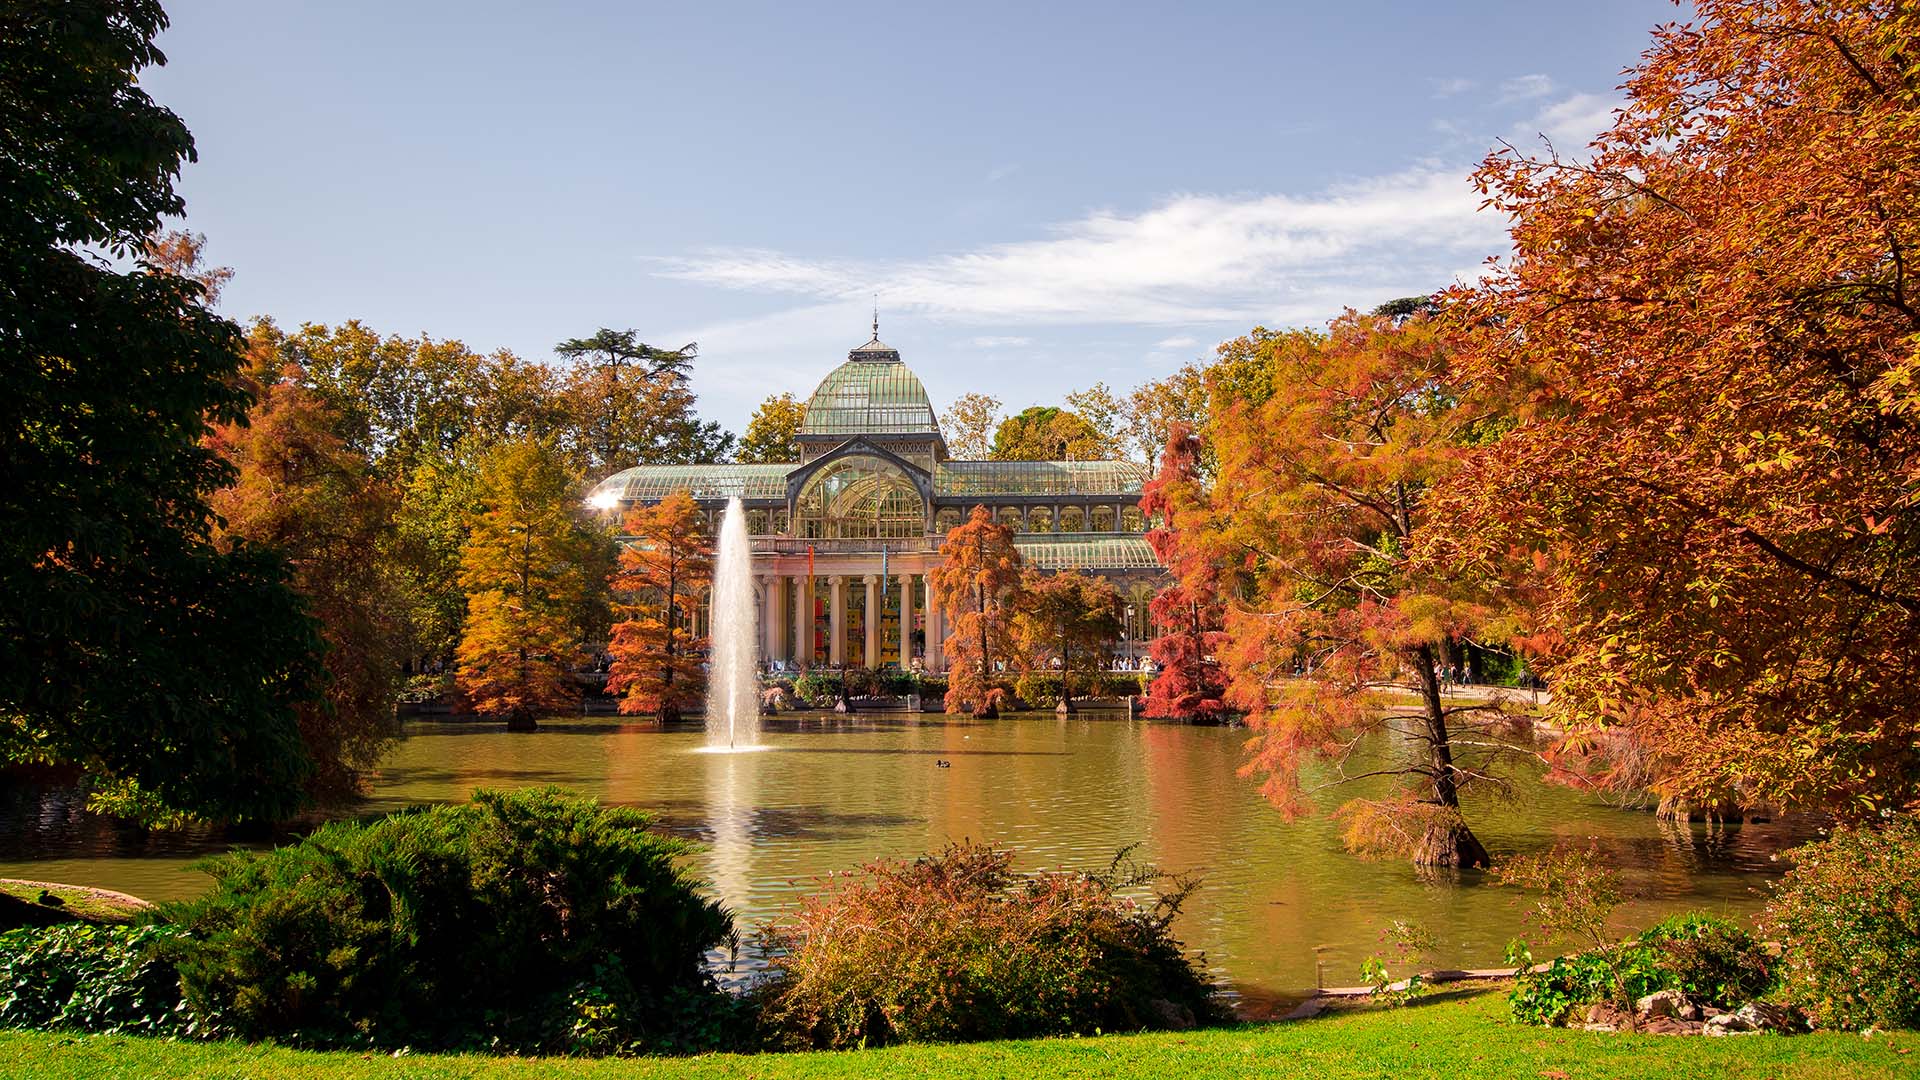 Fall in love with Madrid's Retiro Park 